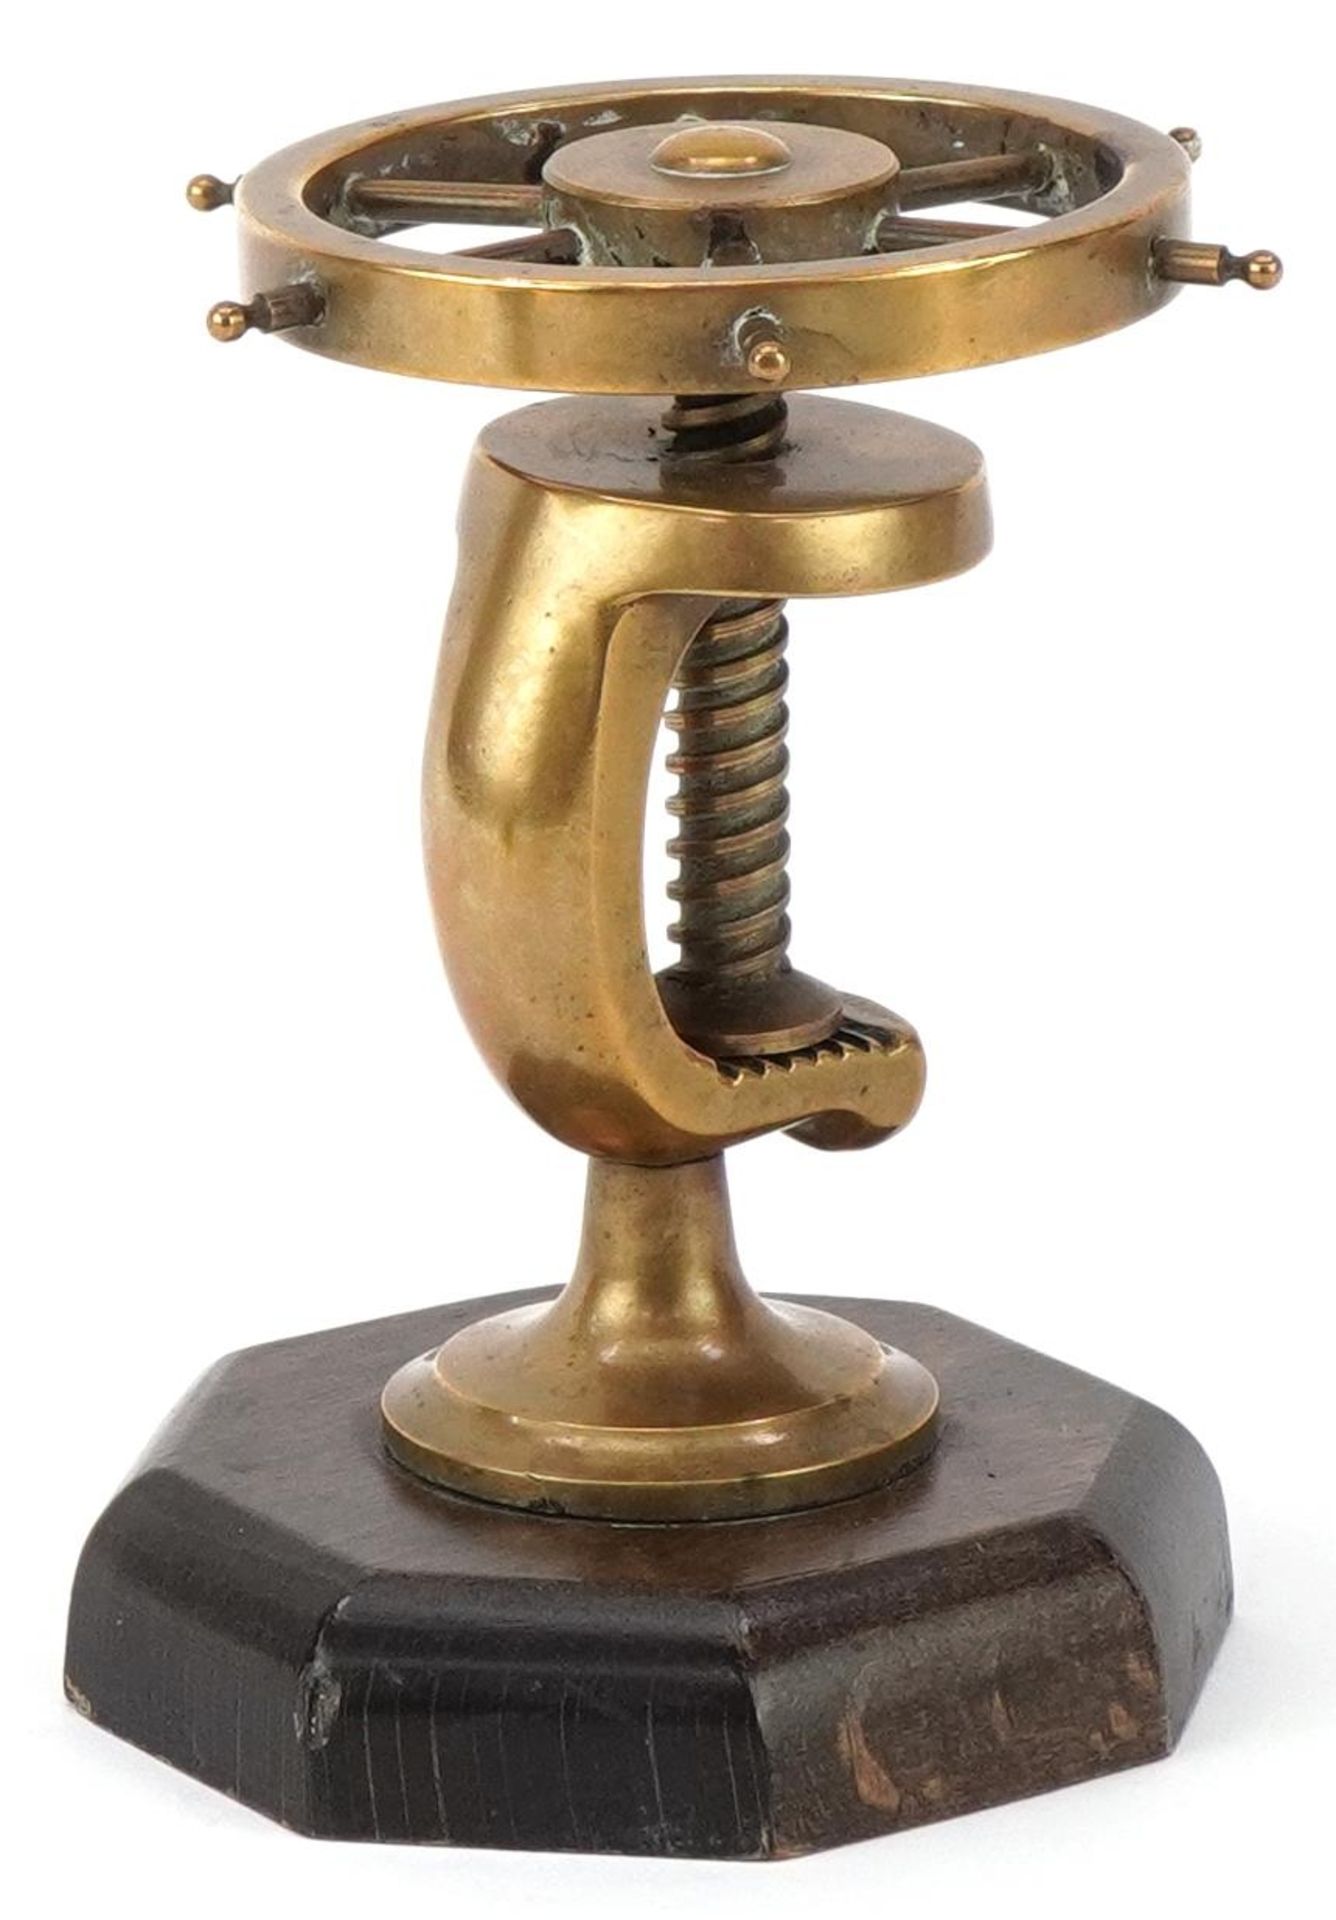 Vintage wooden and brass nutcracker in the form of a ship's wheel, 12cm high - Image 4 of 5